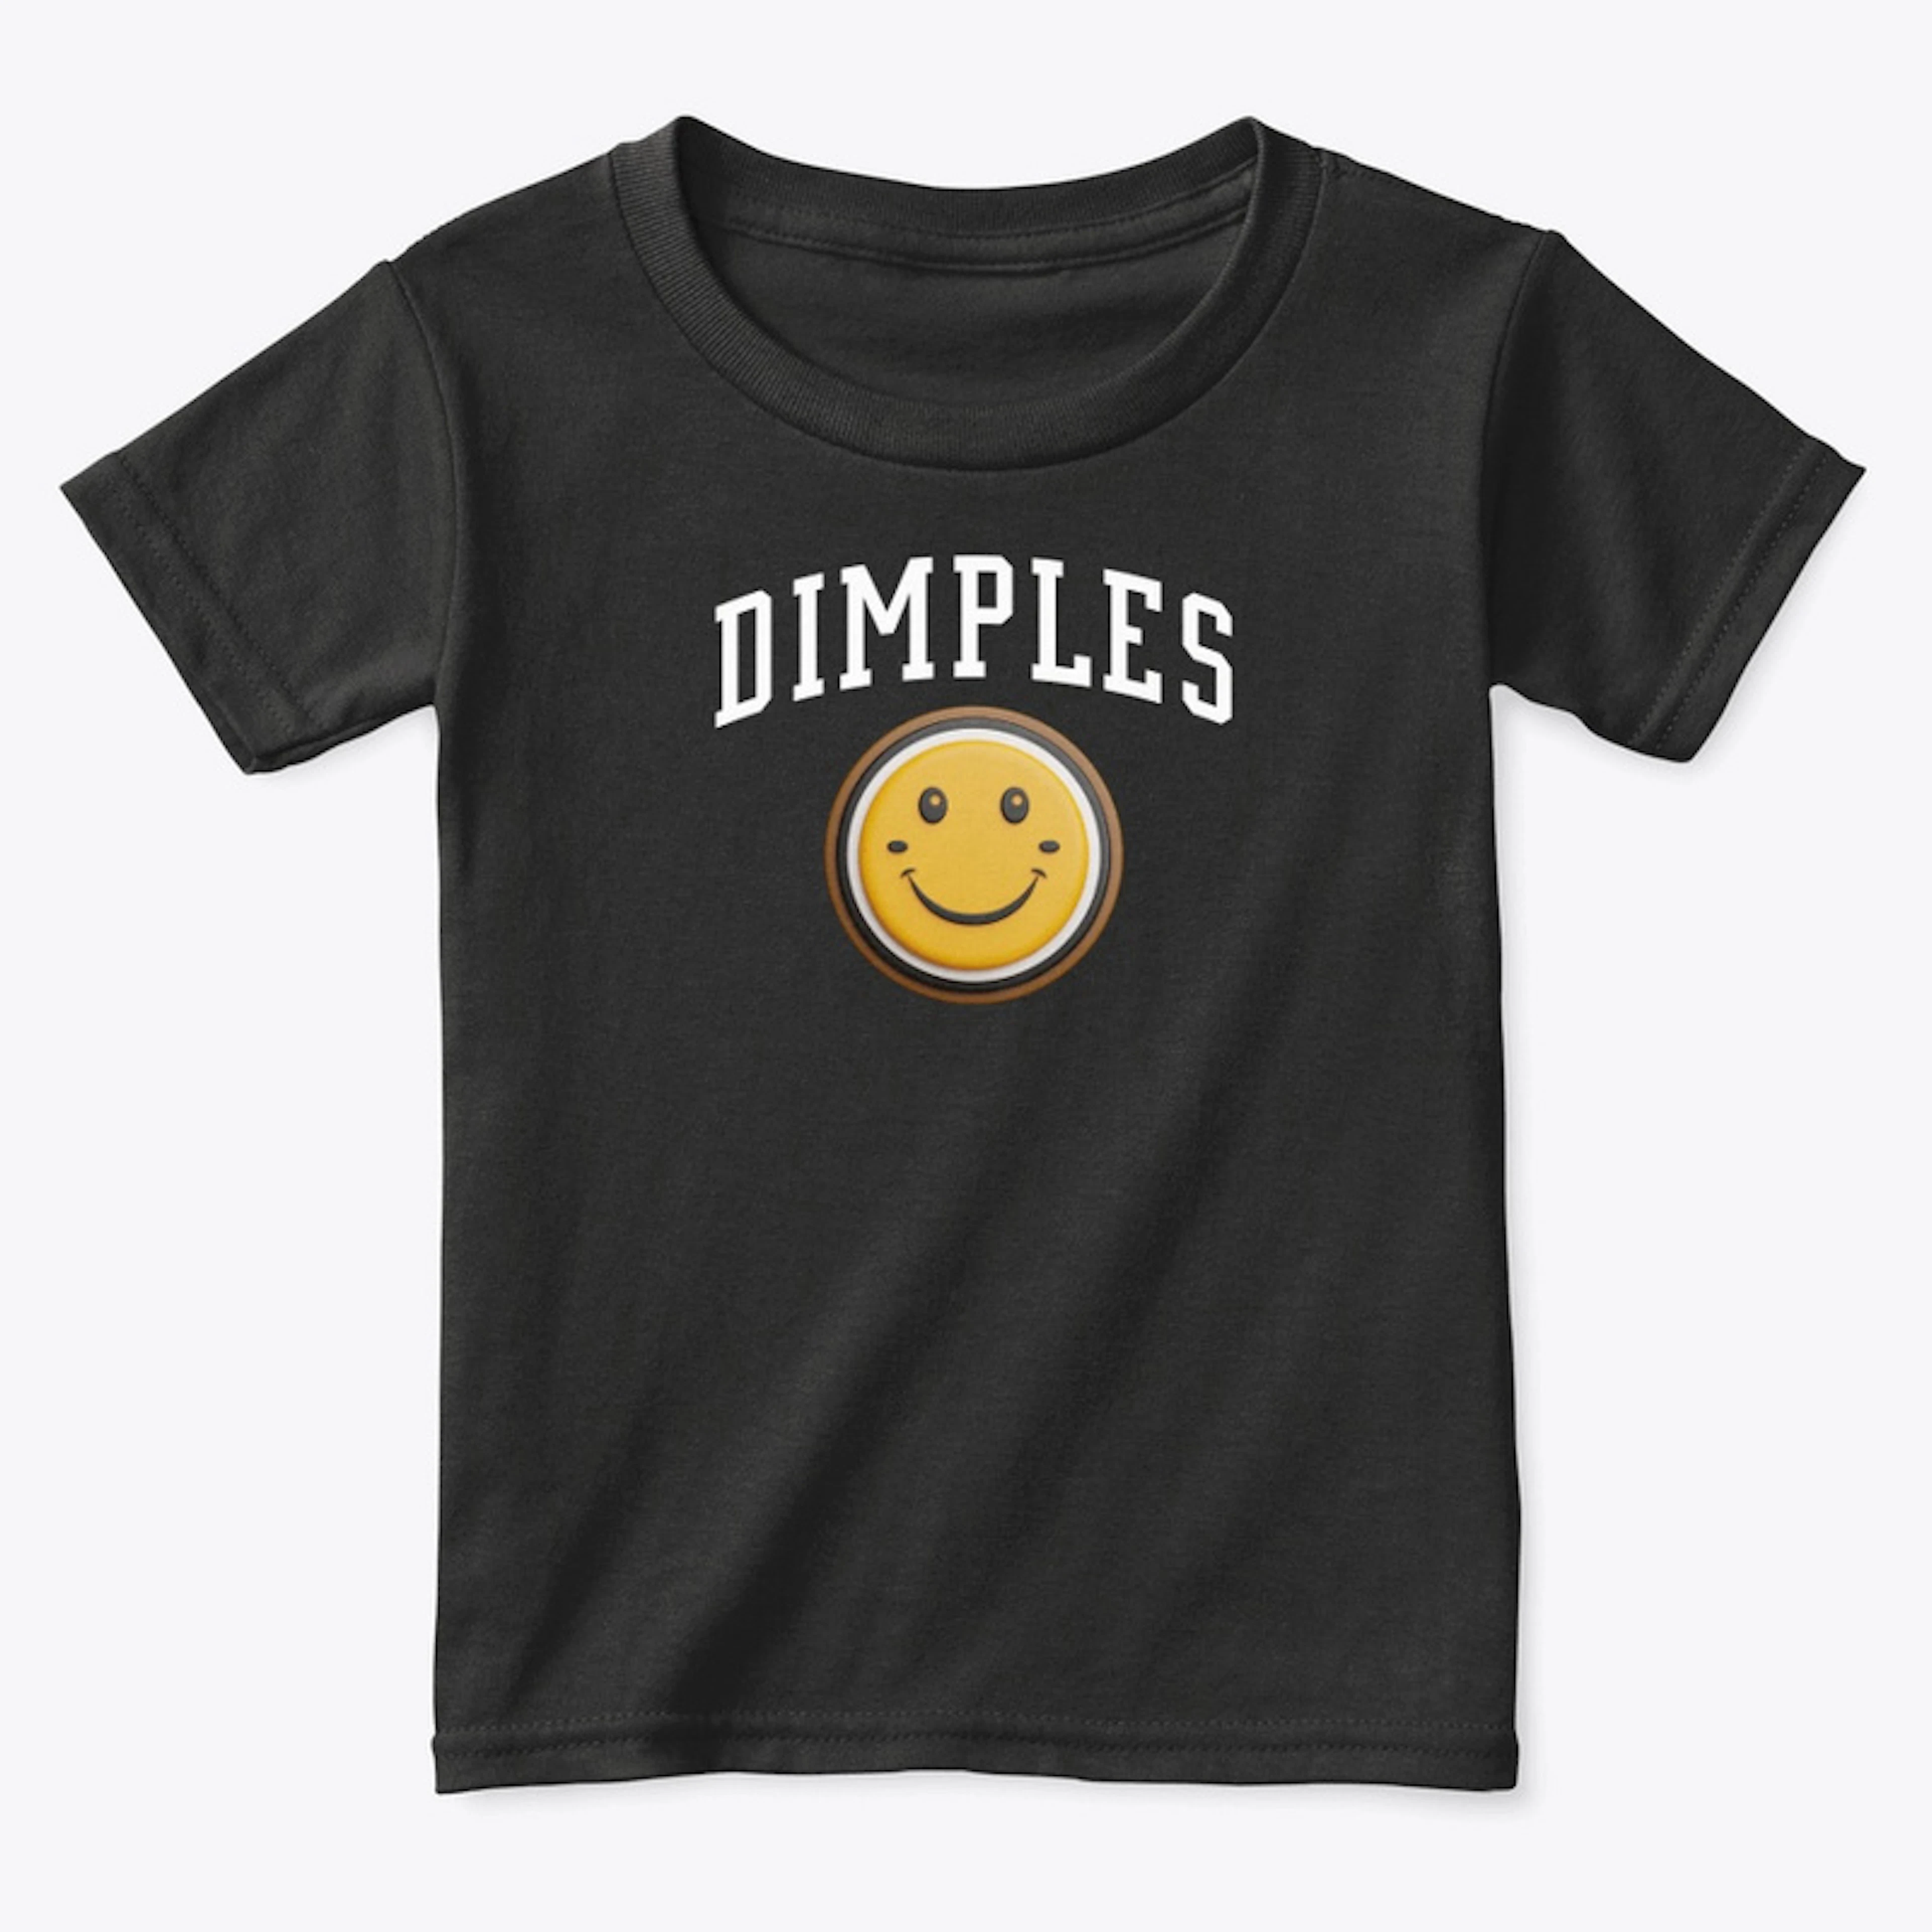 Sportin' Dimples